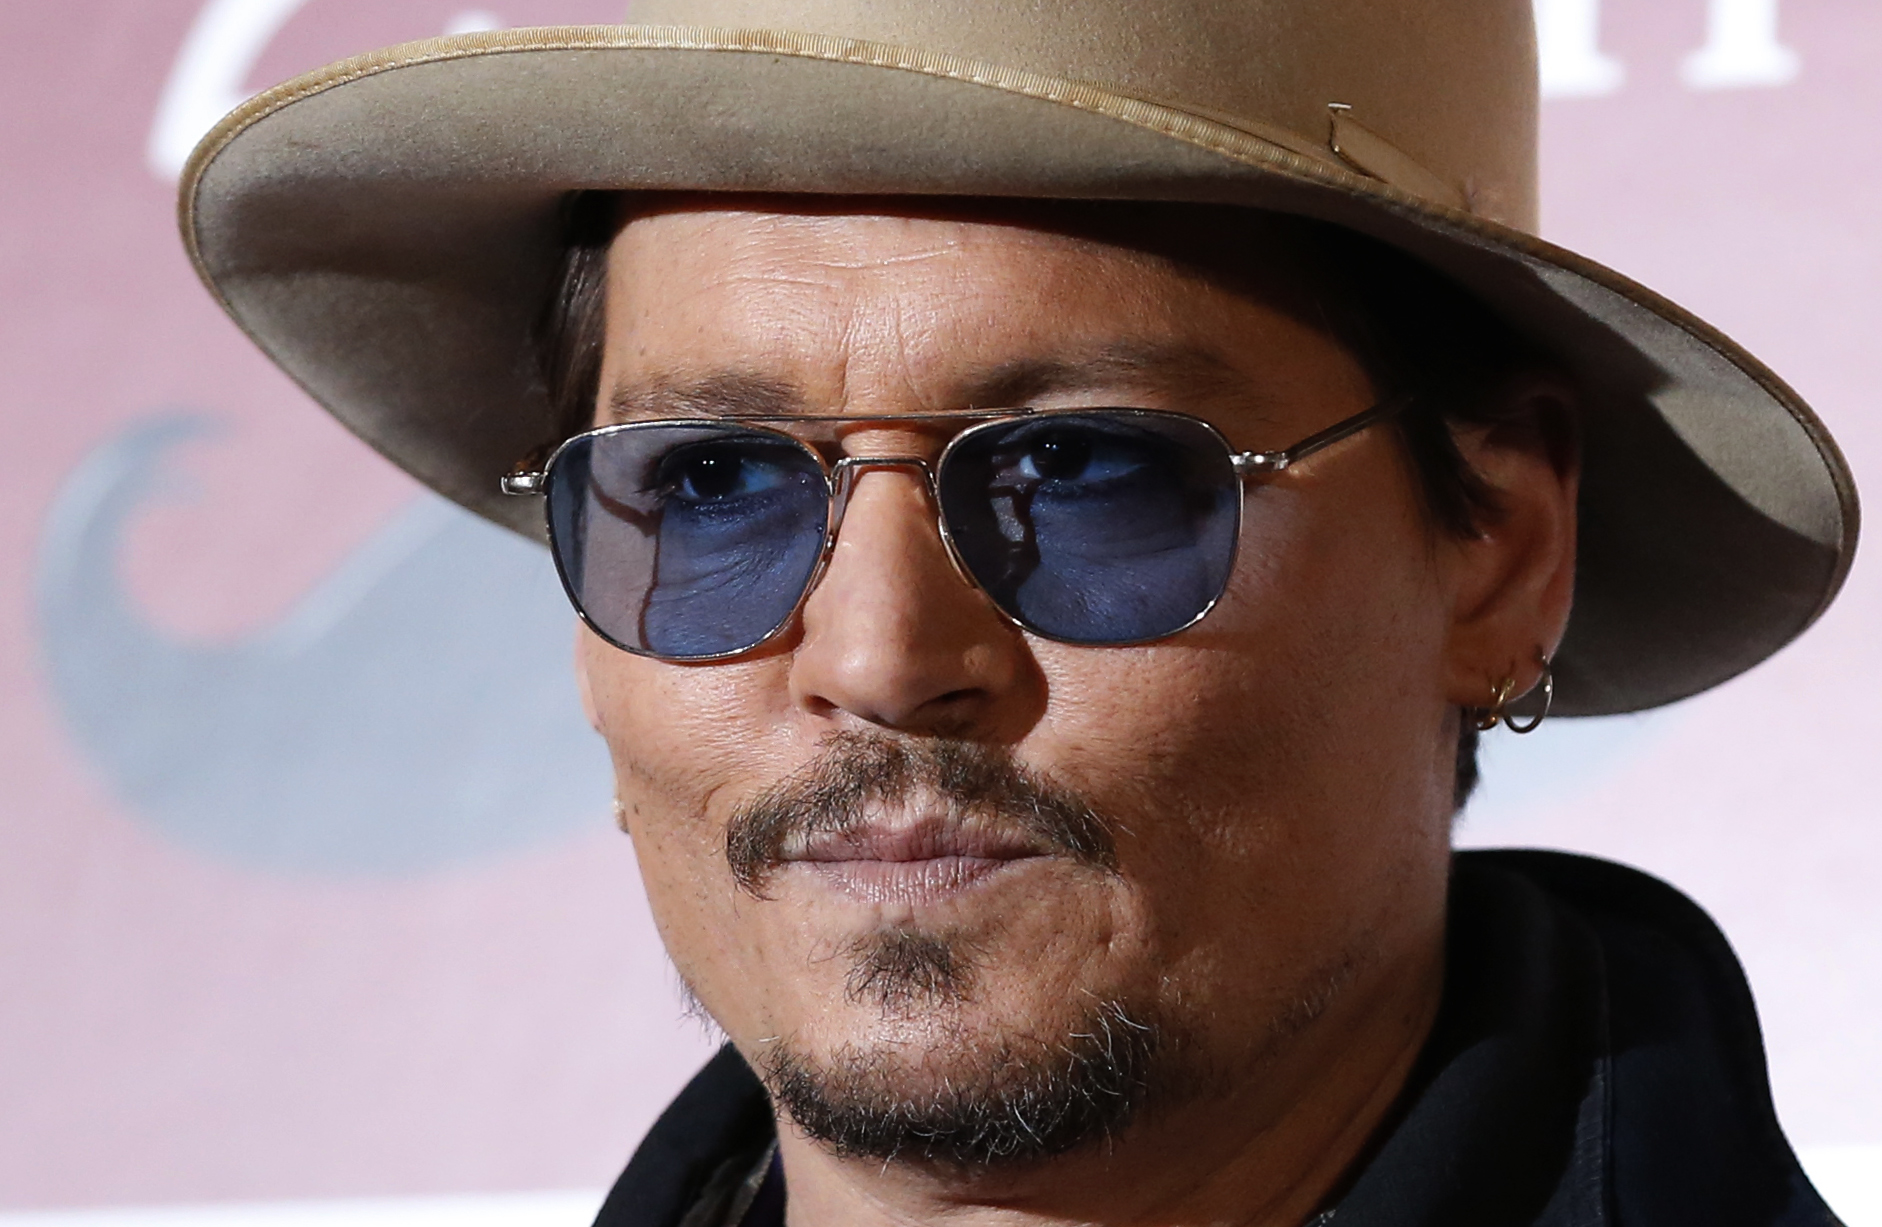 Actor Johnny Depp poses during a photo session ahead of a news conference for his movie <i>Mortdecai</i> in Tokyo on Jan. 28, 2015 (Toru Hanai—Reuters)